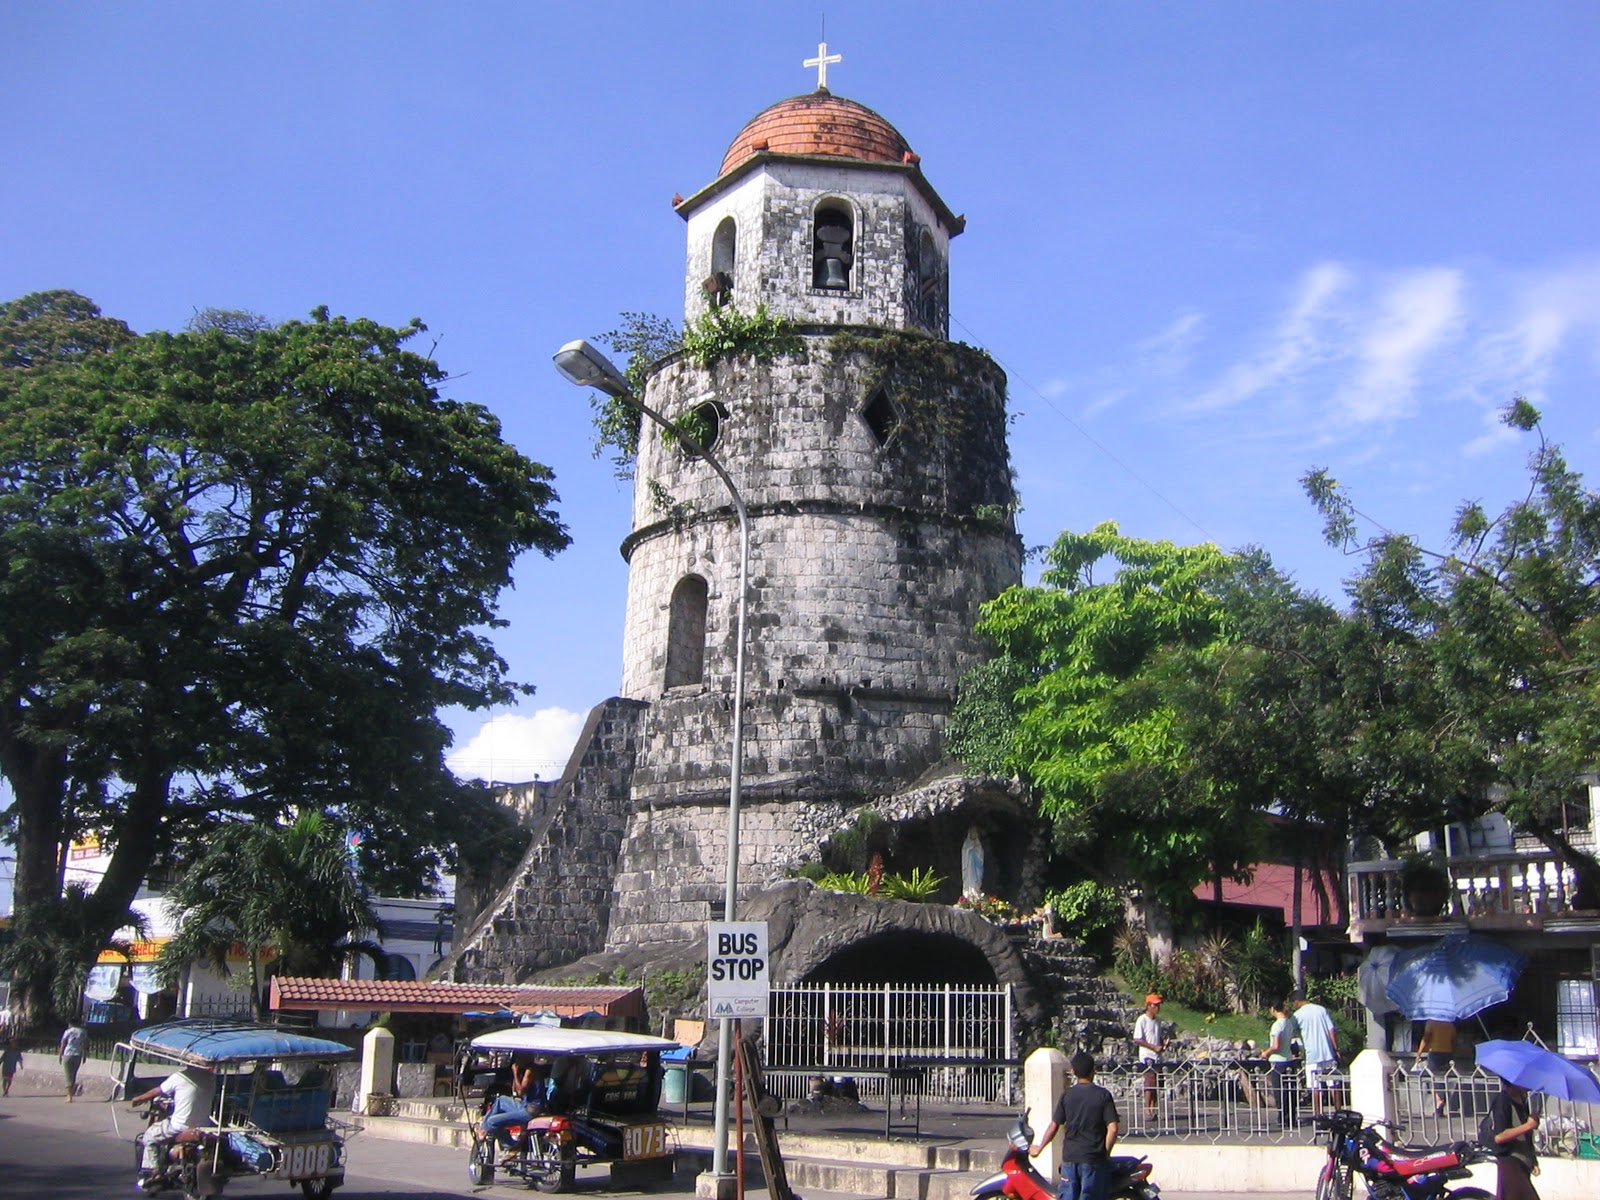 Dumaguete "The City Of Gentle People"